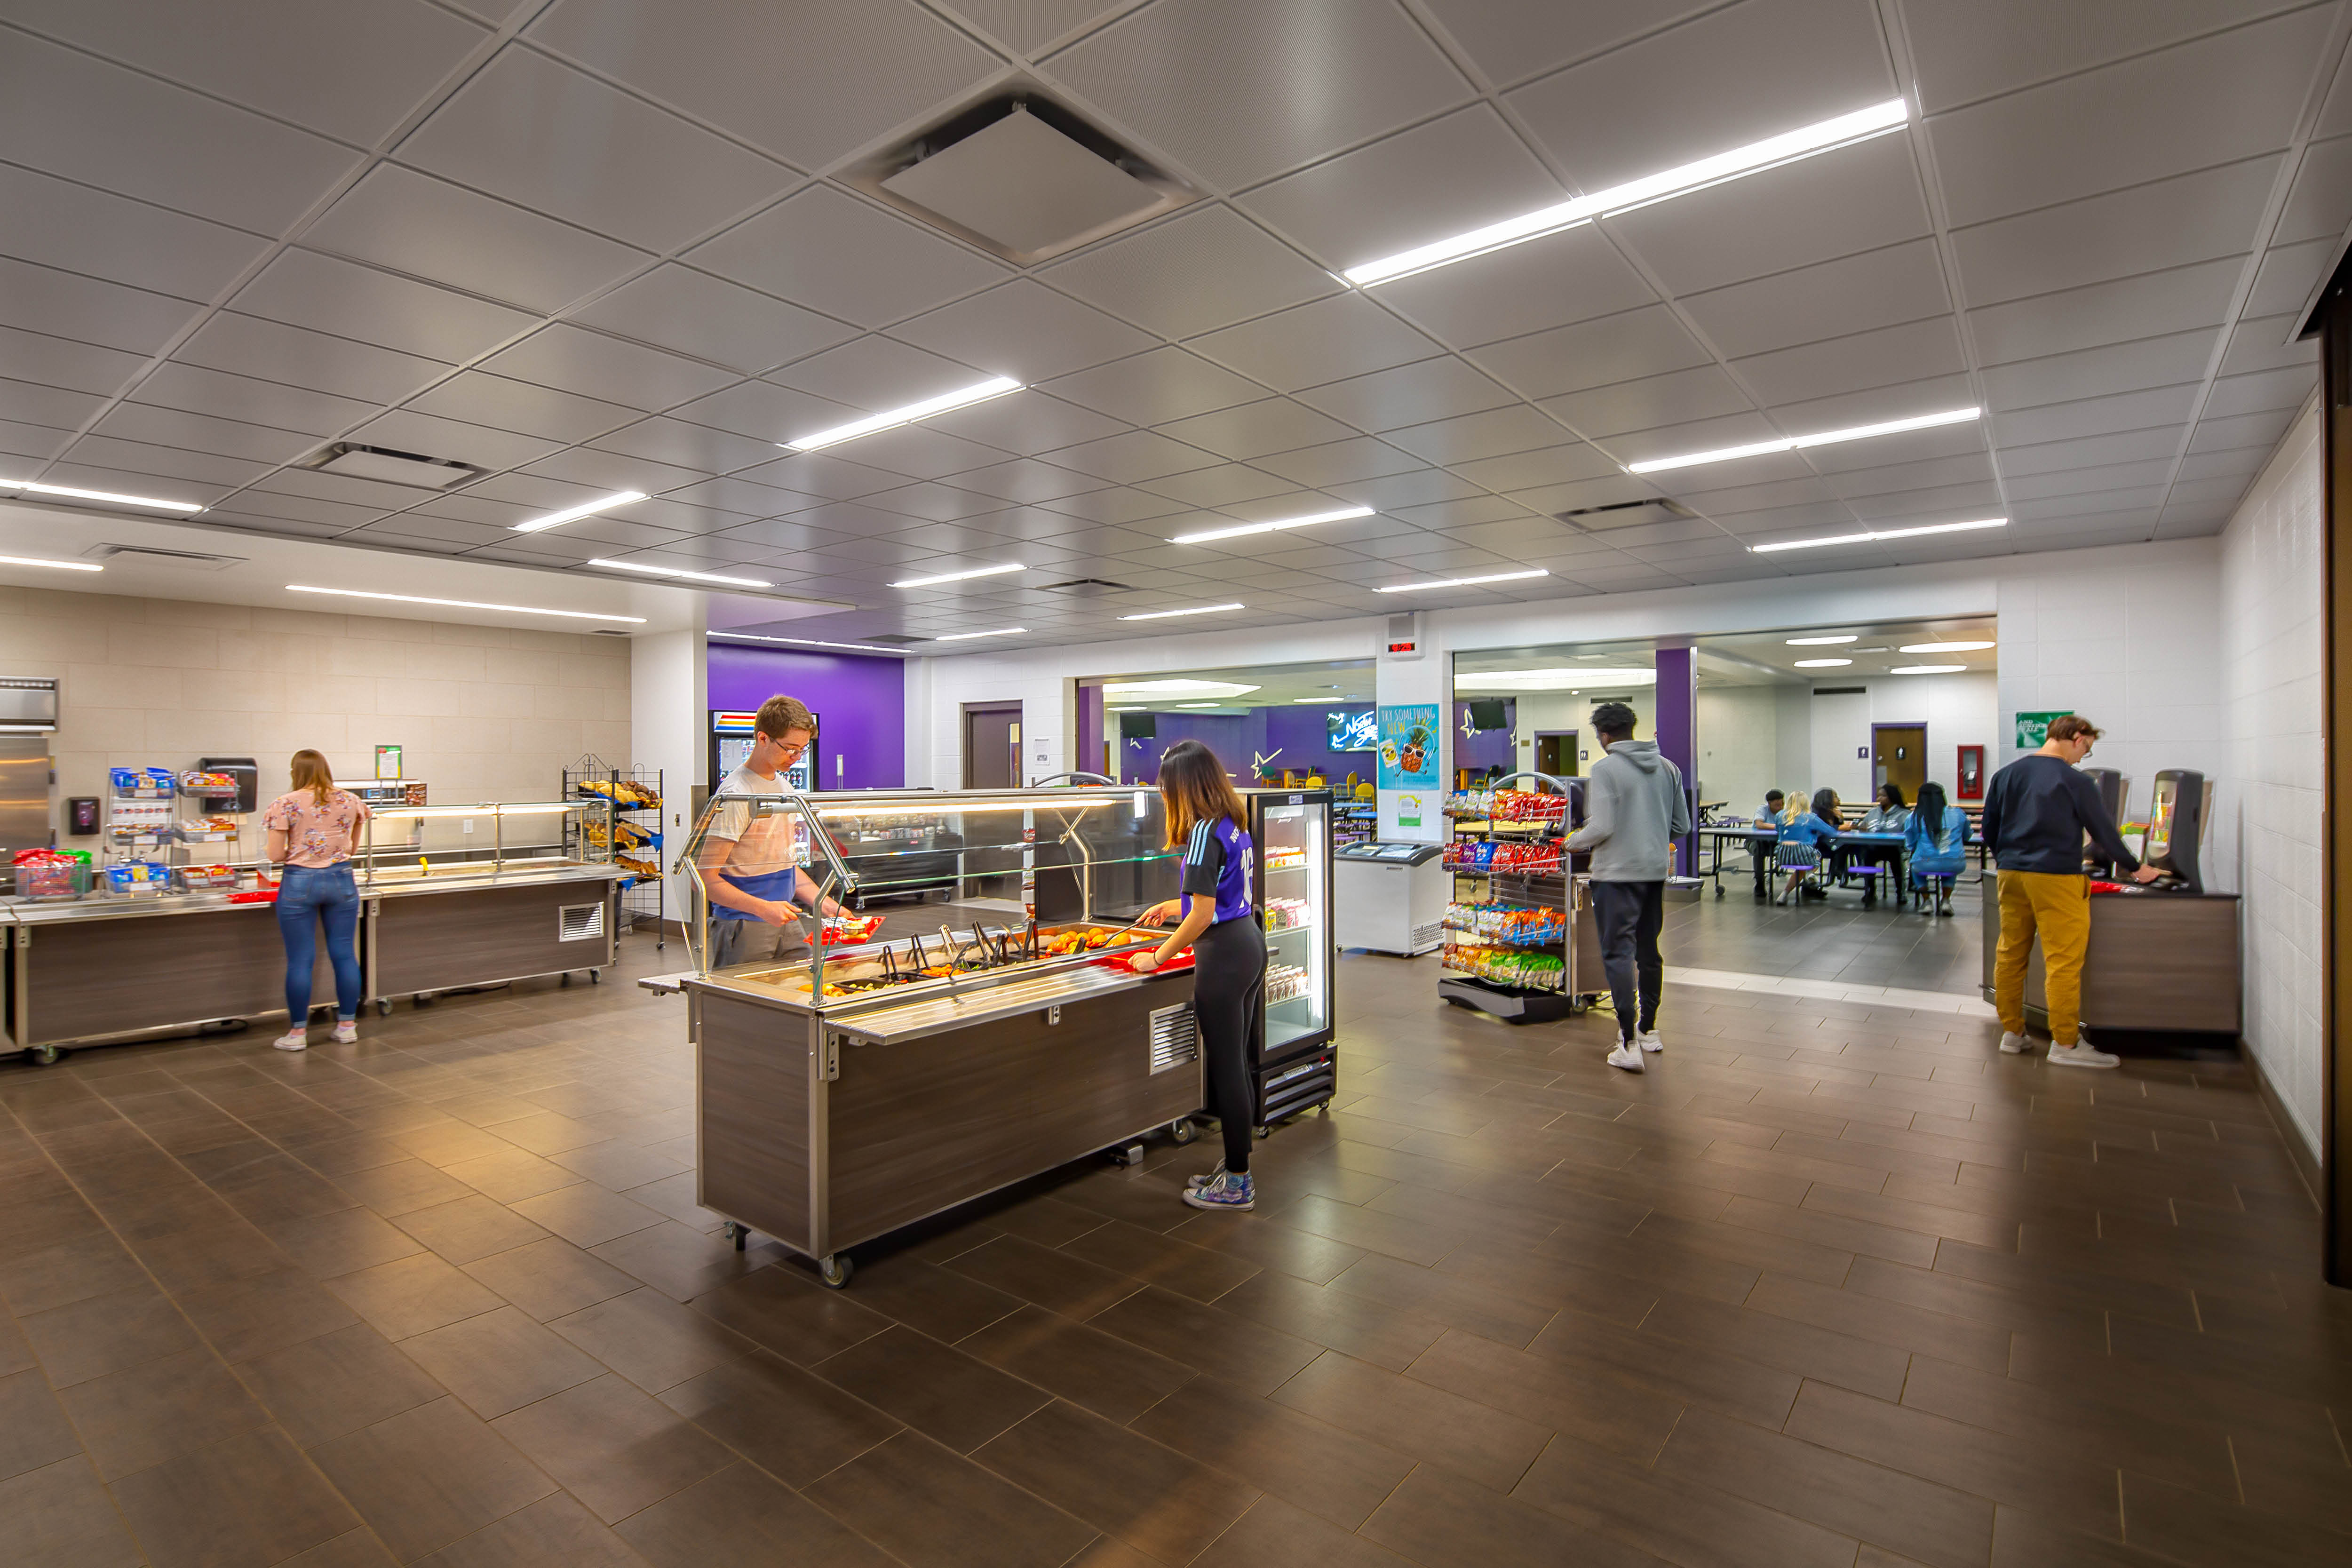 Waukesha North Kitchen Commons and Servery designed by Bray Architects